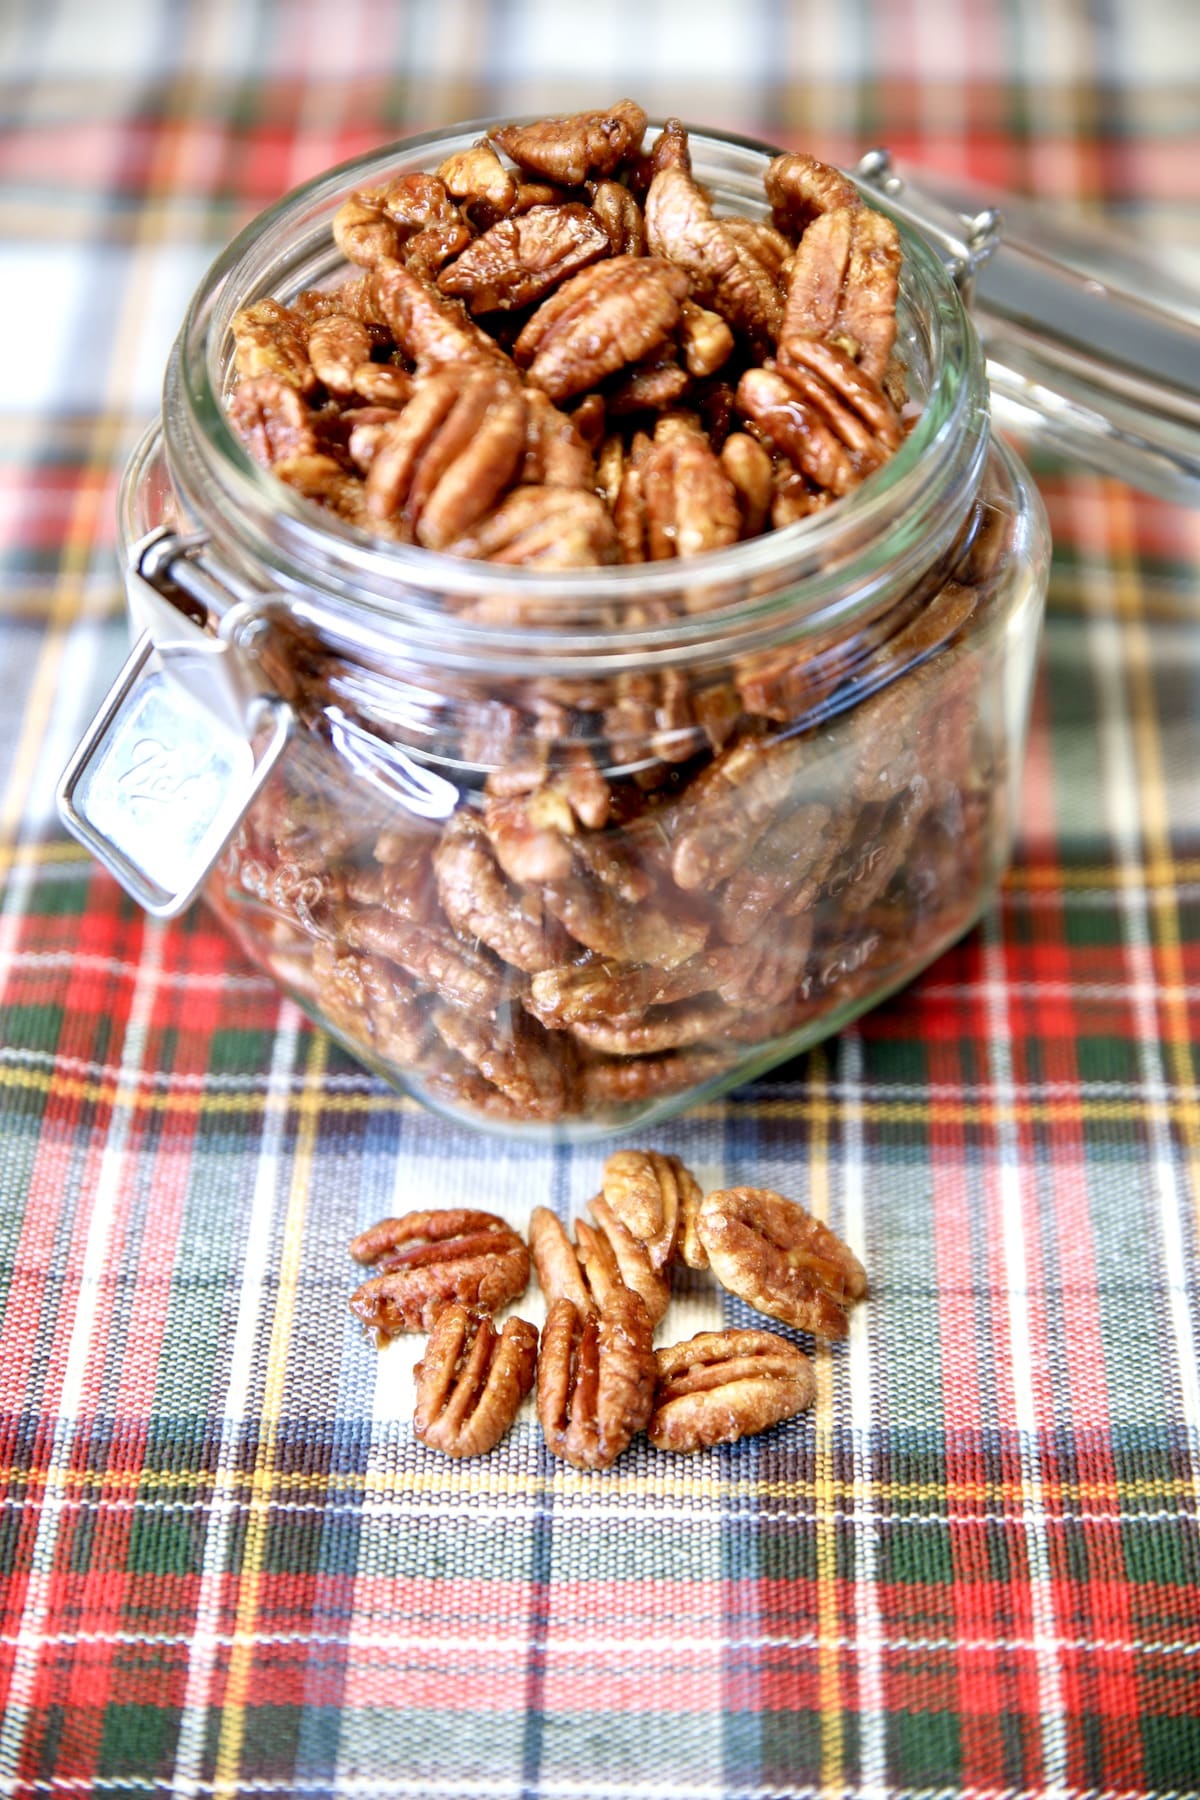 Jar of candied pecans, a few in front of the jar.